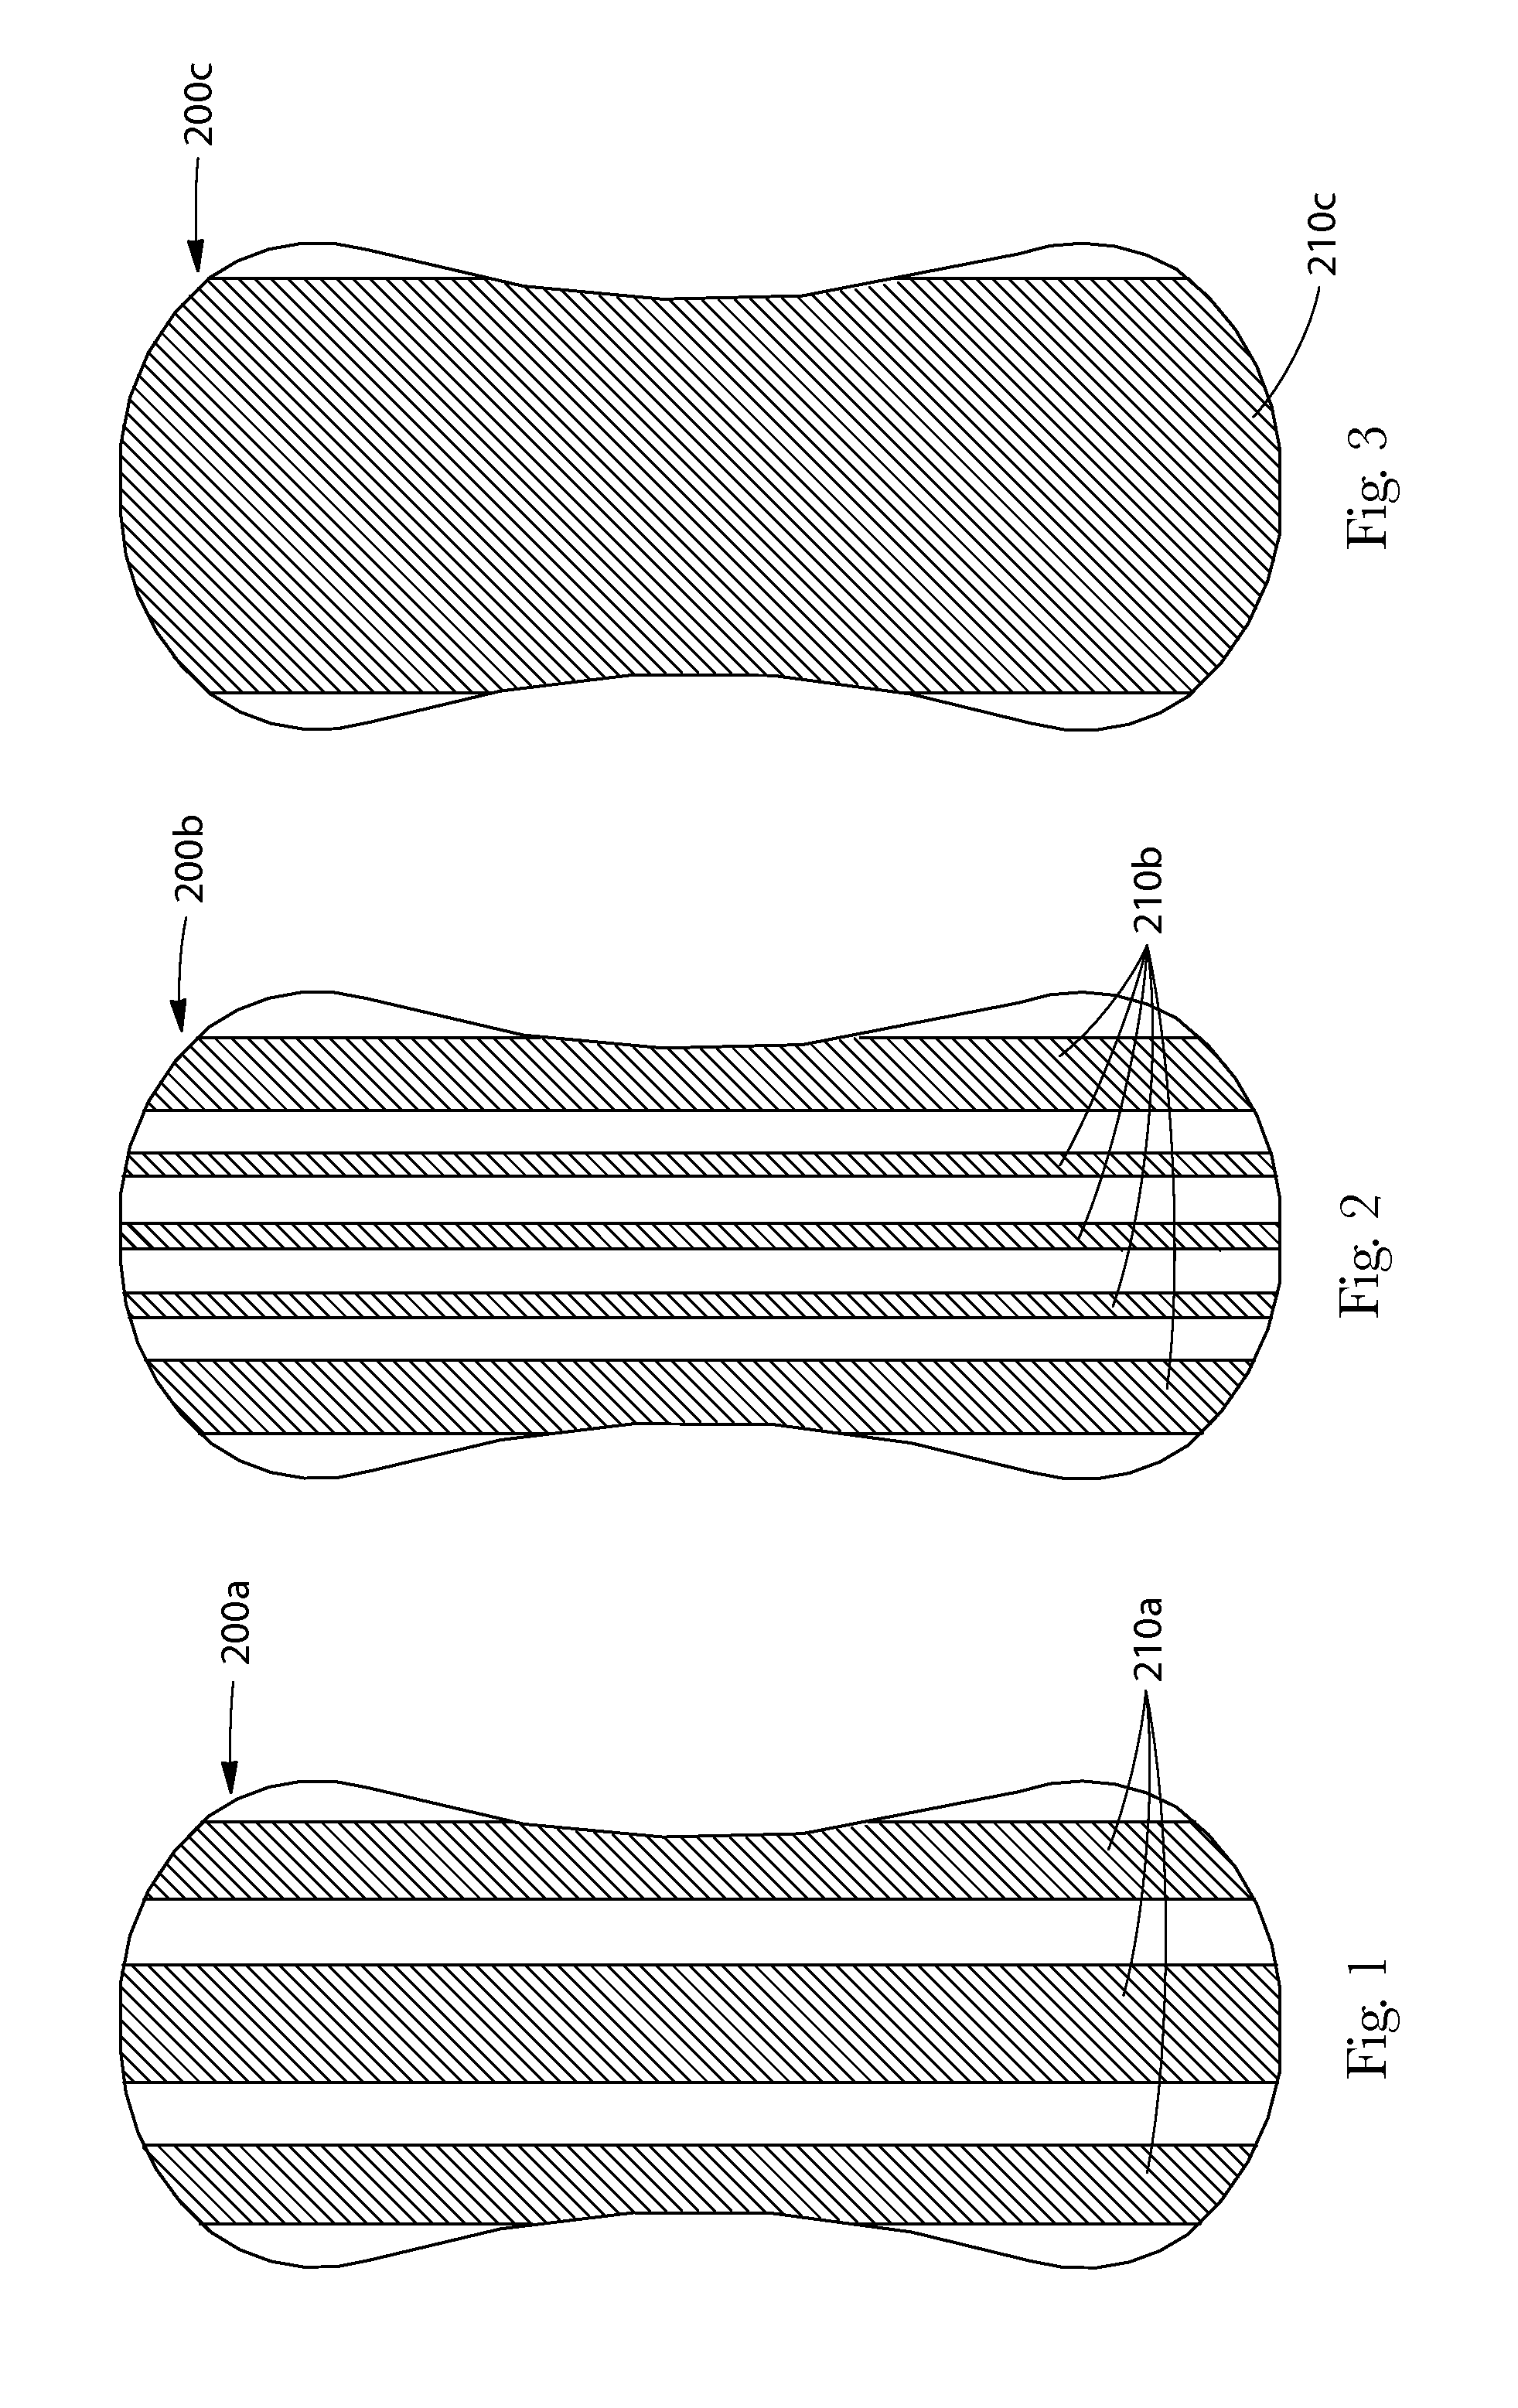 Method of producing color change in a substrate